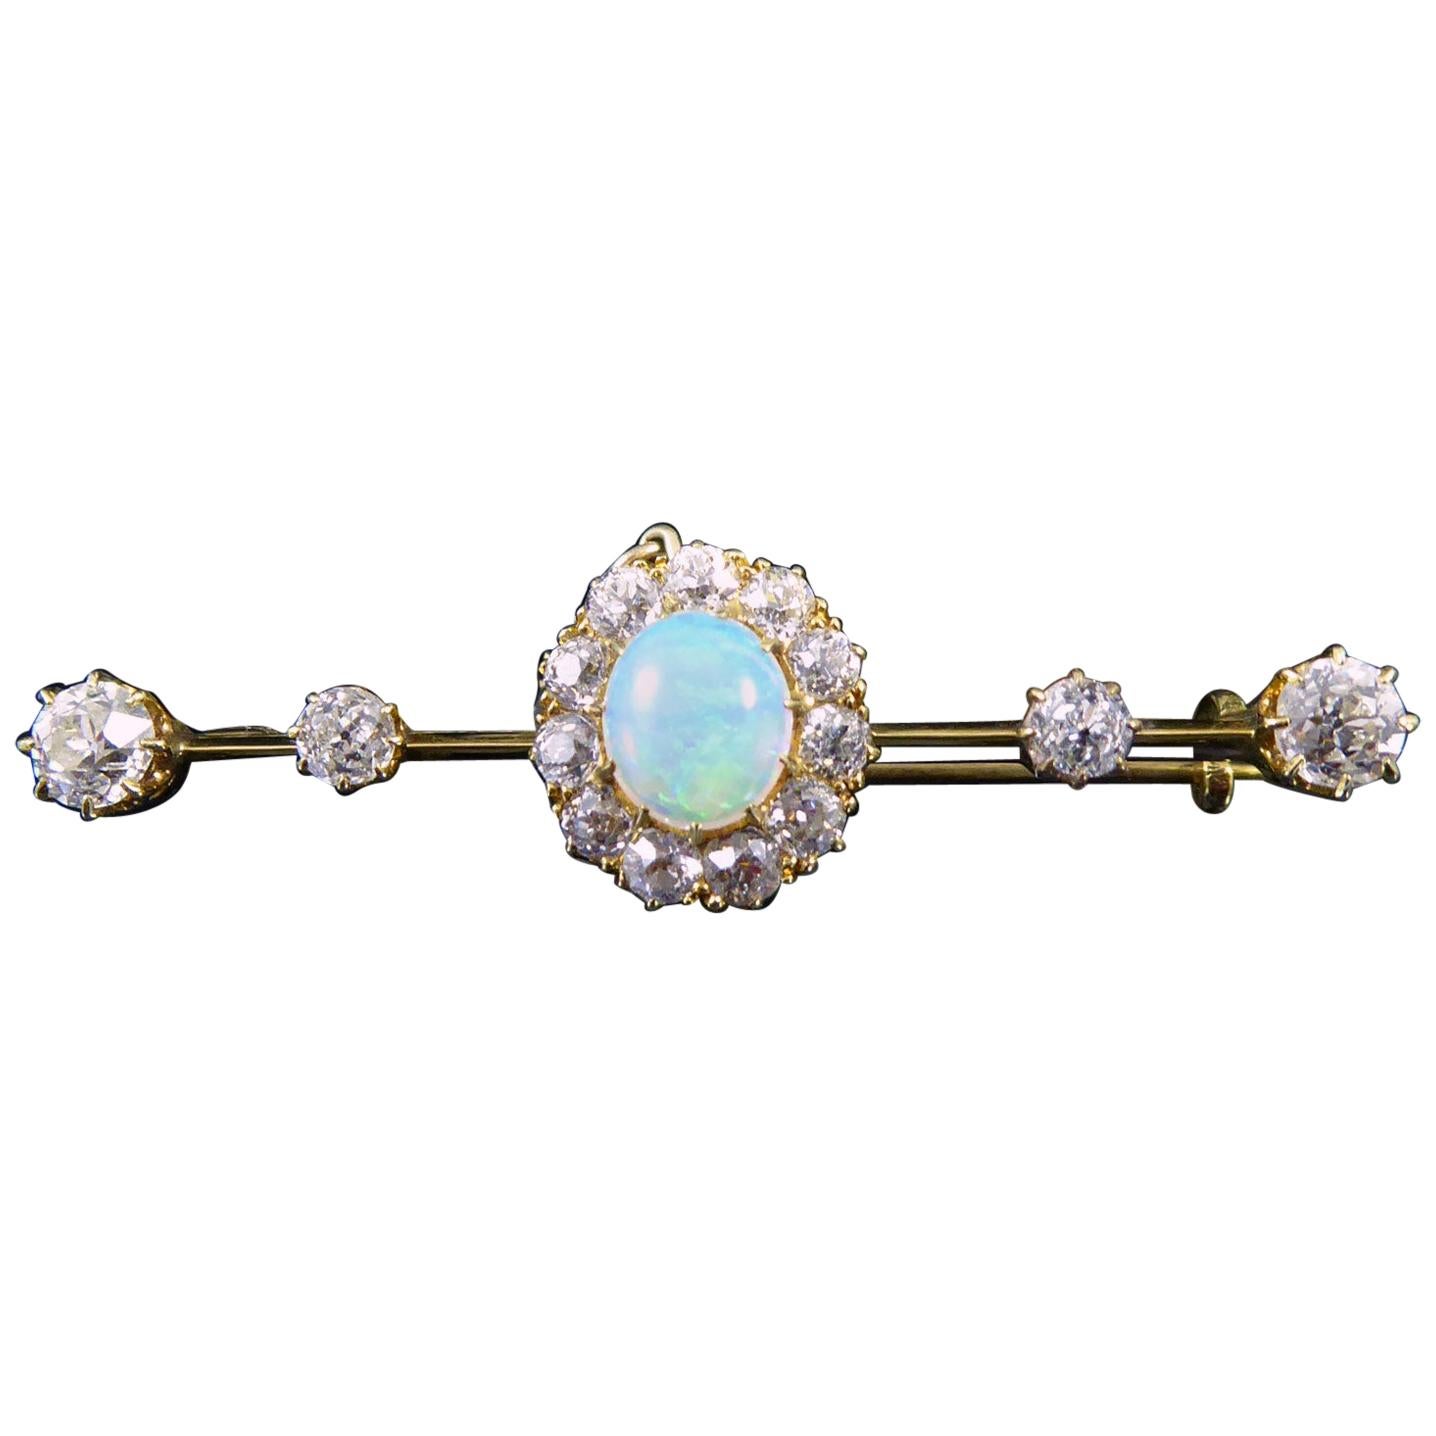 Late Victorian Opal and Diamond Bar Brooch, Tests as 18 Carat Yellow Gold